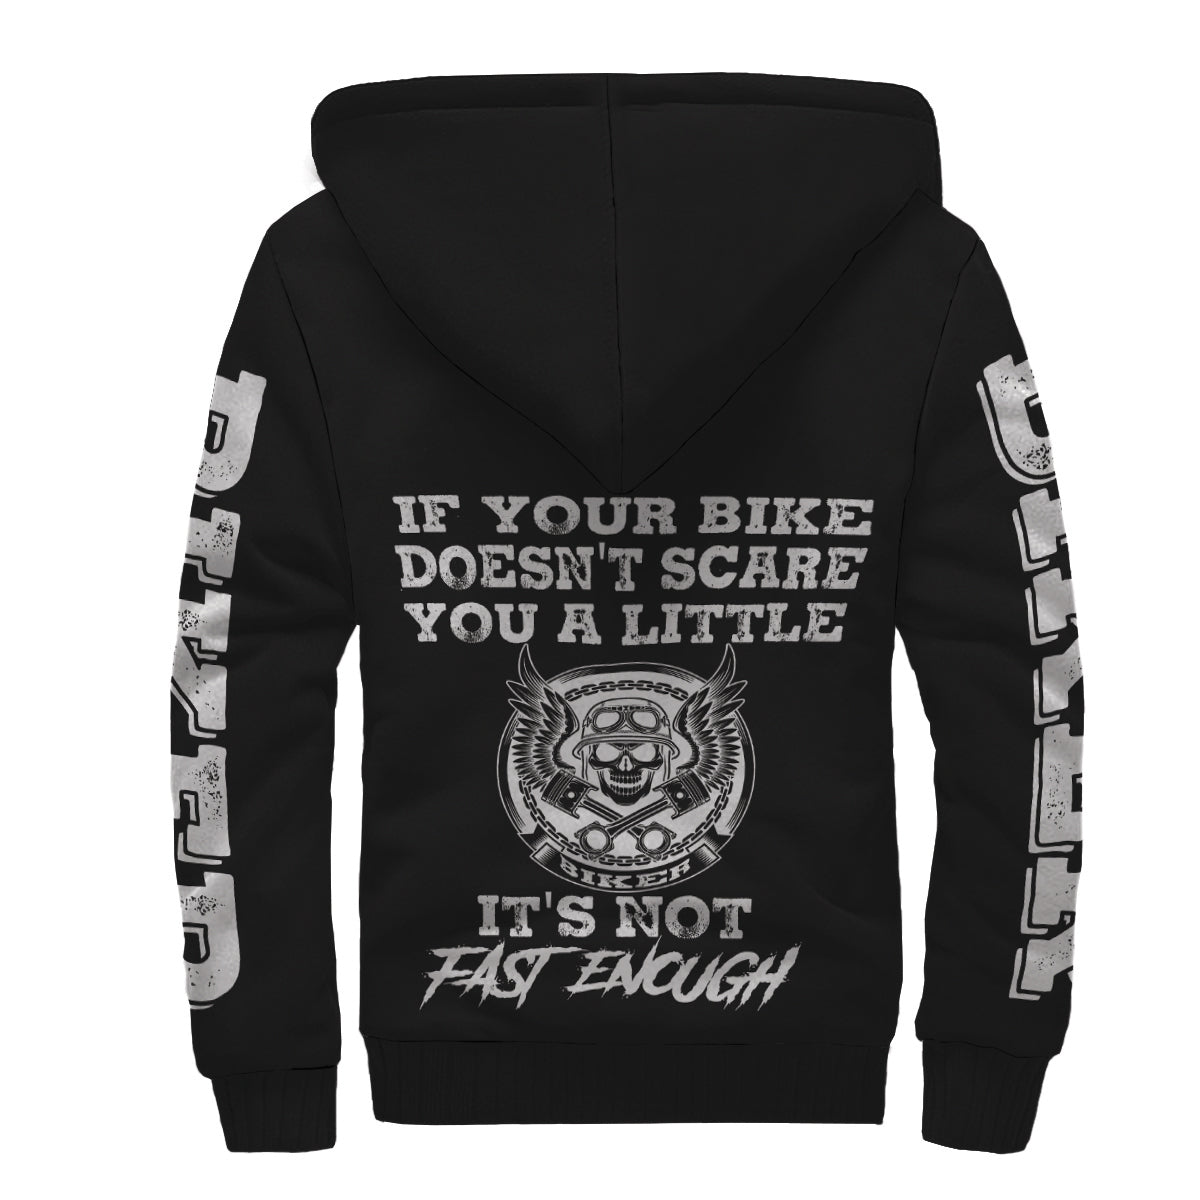 If Your Bike Doesn't Scare You It's Not Fast Enough Sherpa Jacket